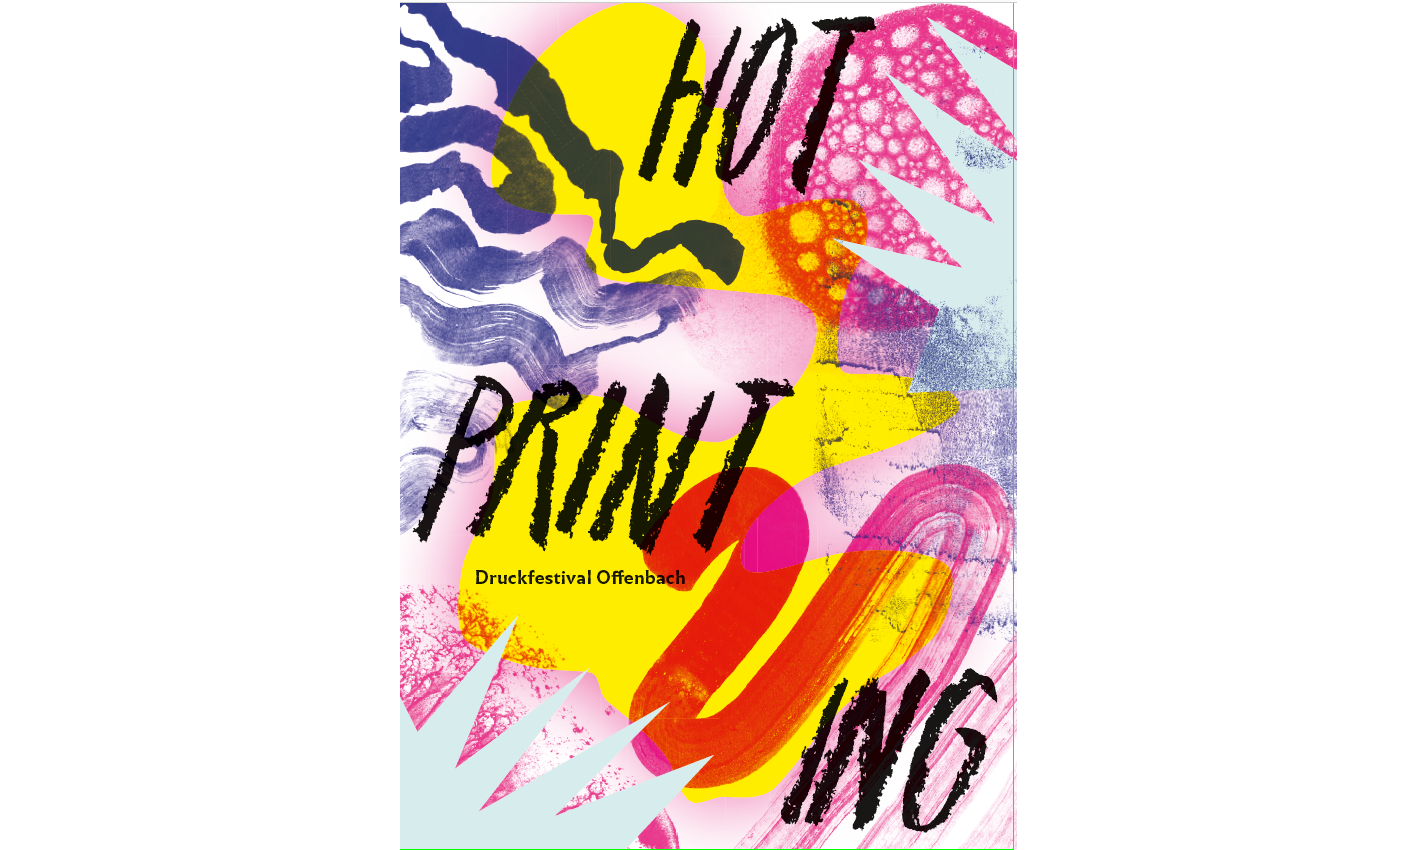 Hot Printing Offenbach